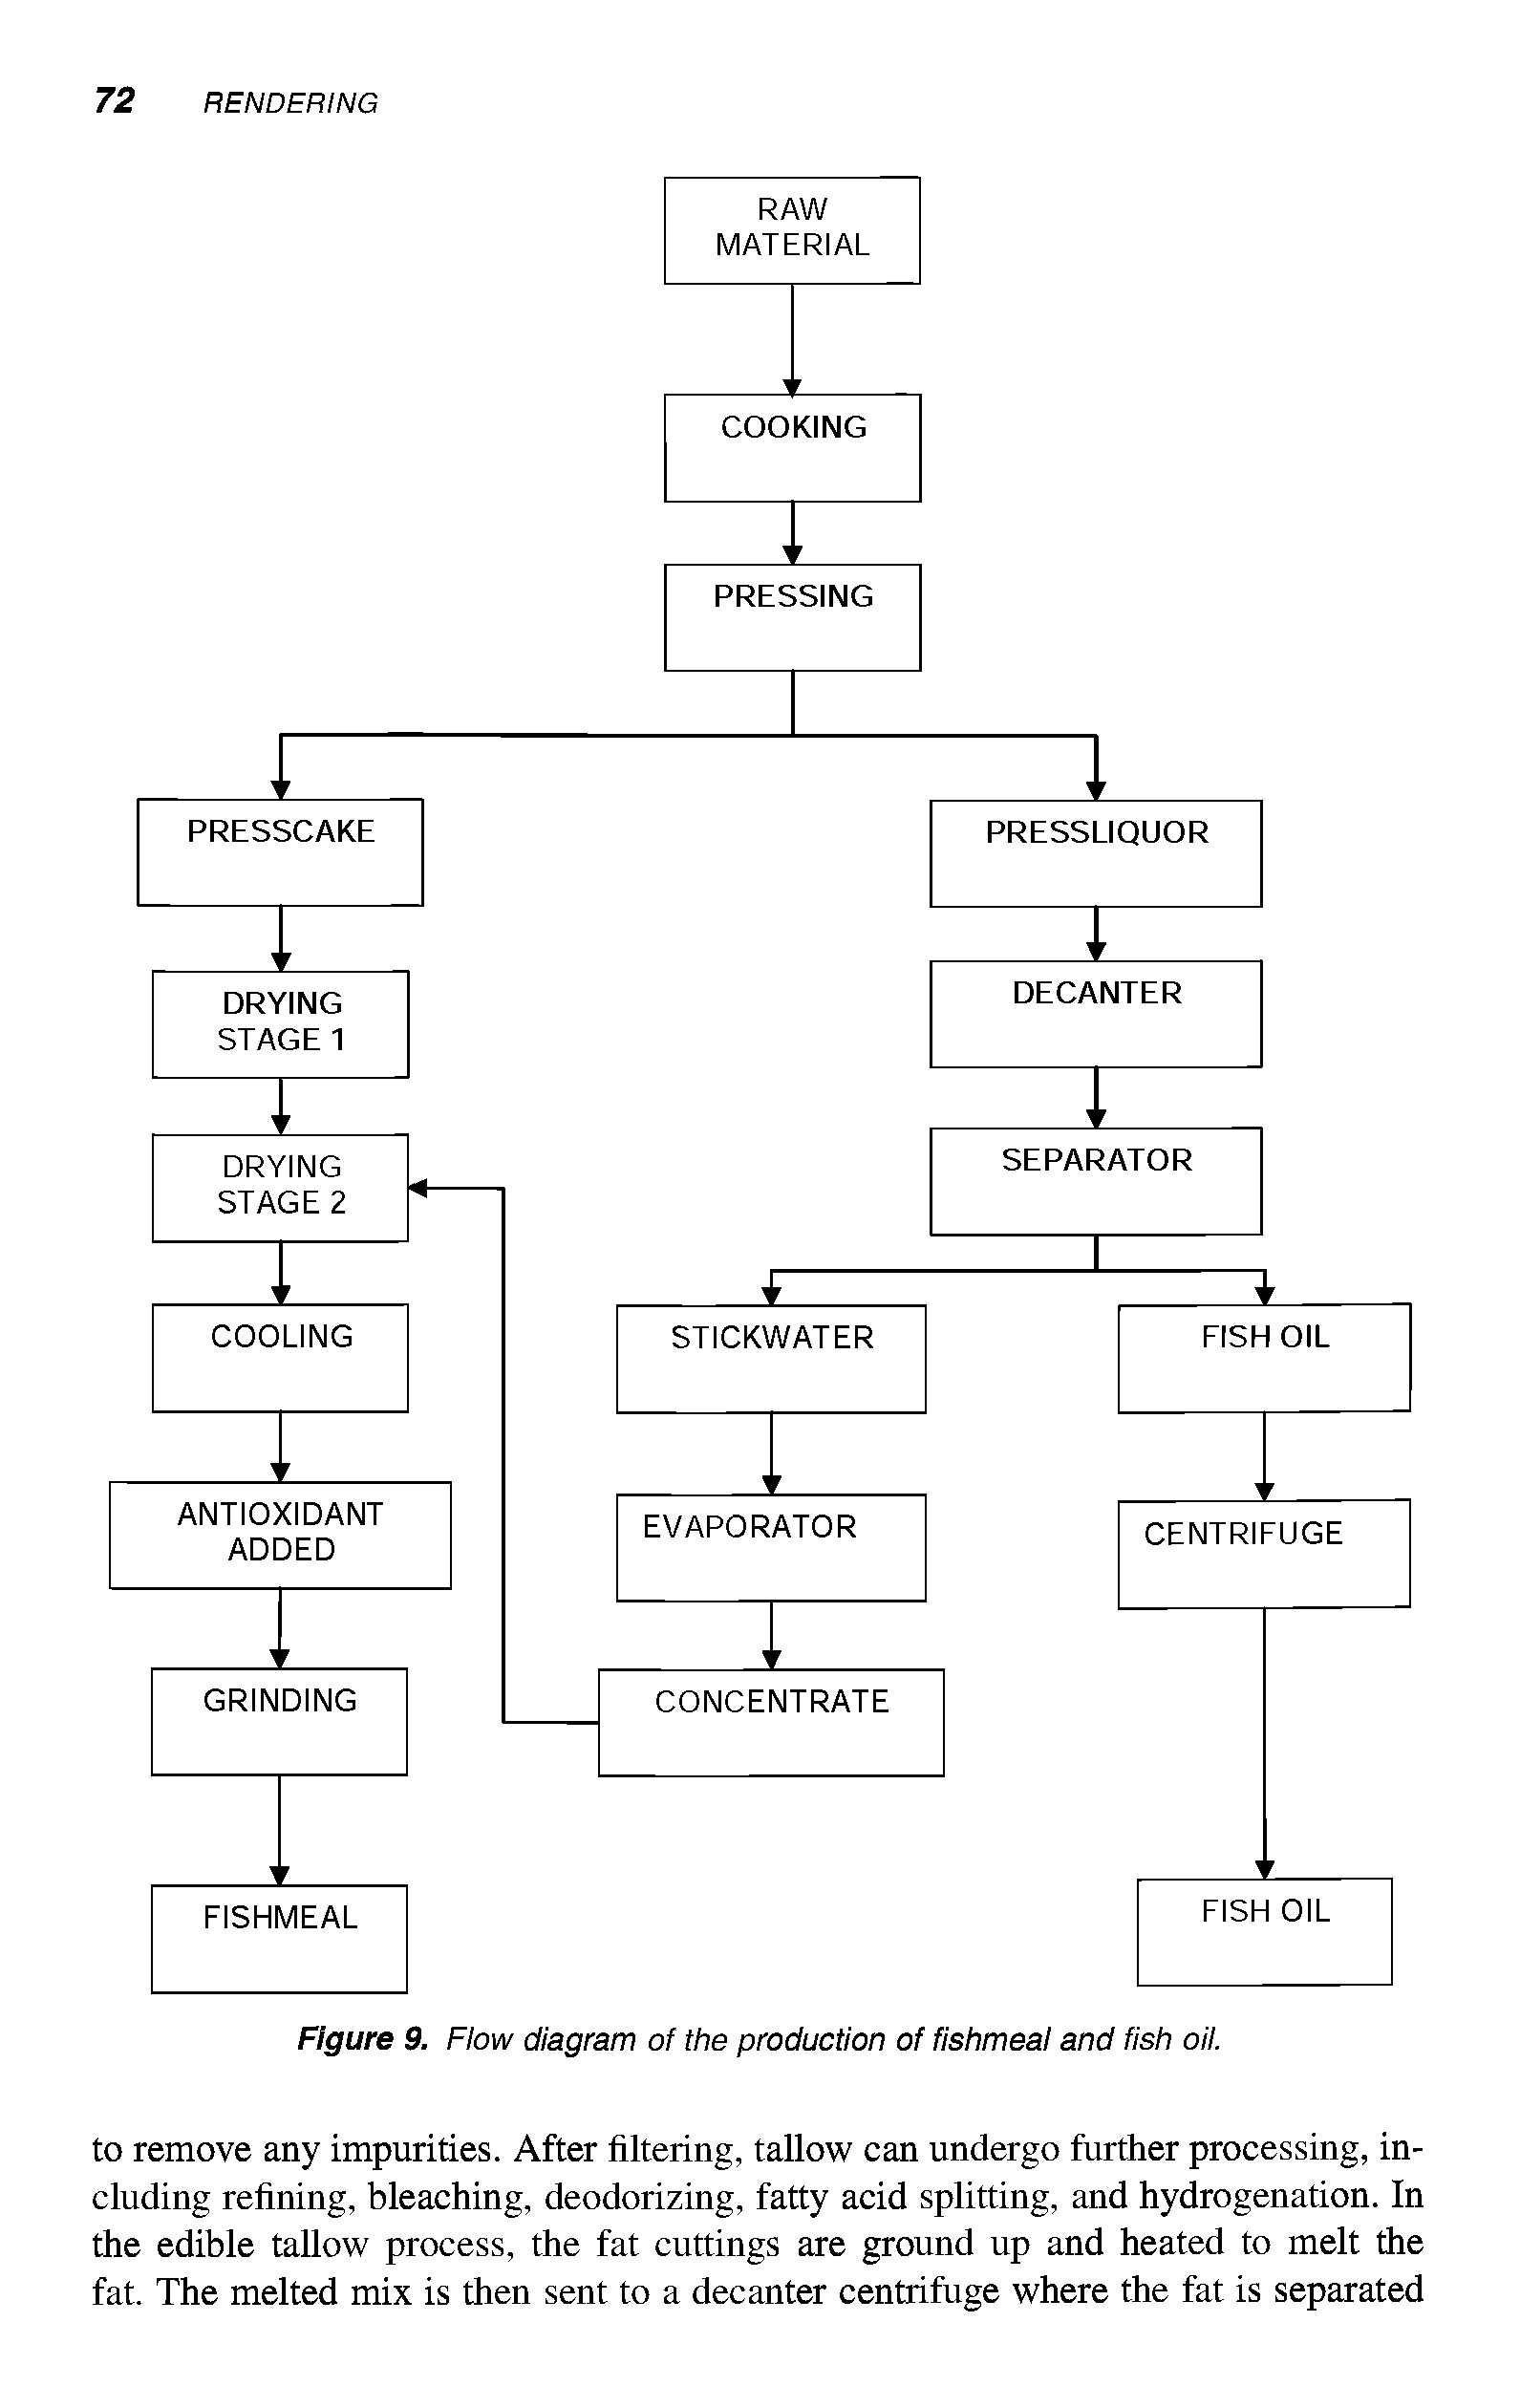 Figure 9. Flow diagram of the production of fishmeal and fish oil.